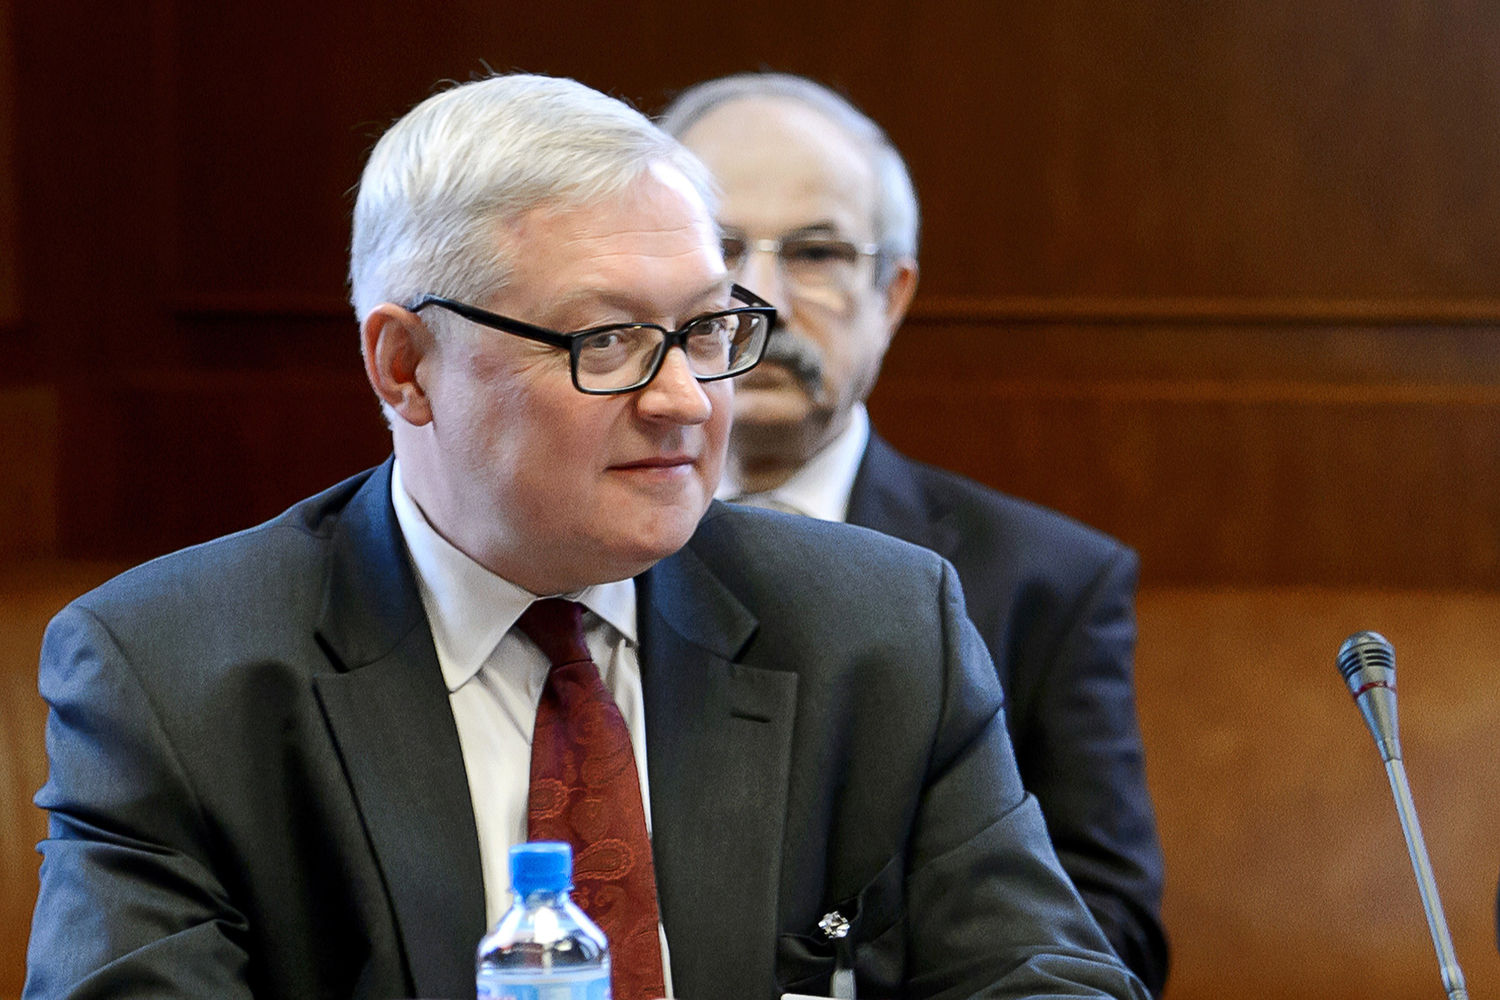 Russian Deputy Foreign Minister Ryabkov looks on at the start of closed-door nuclear talks at the United Nations offices in Geneva